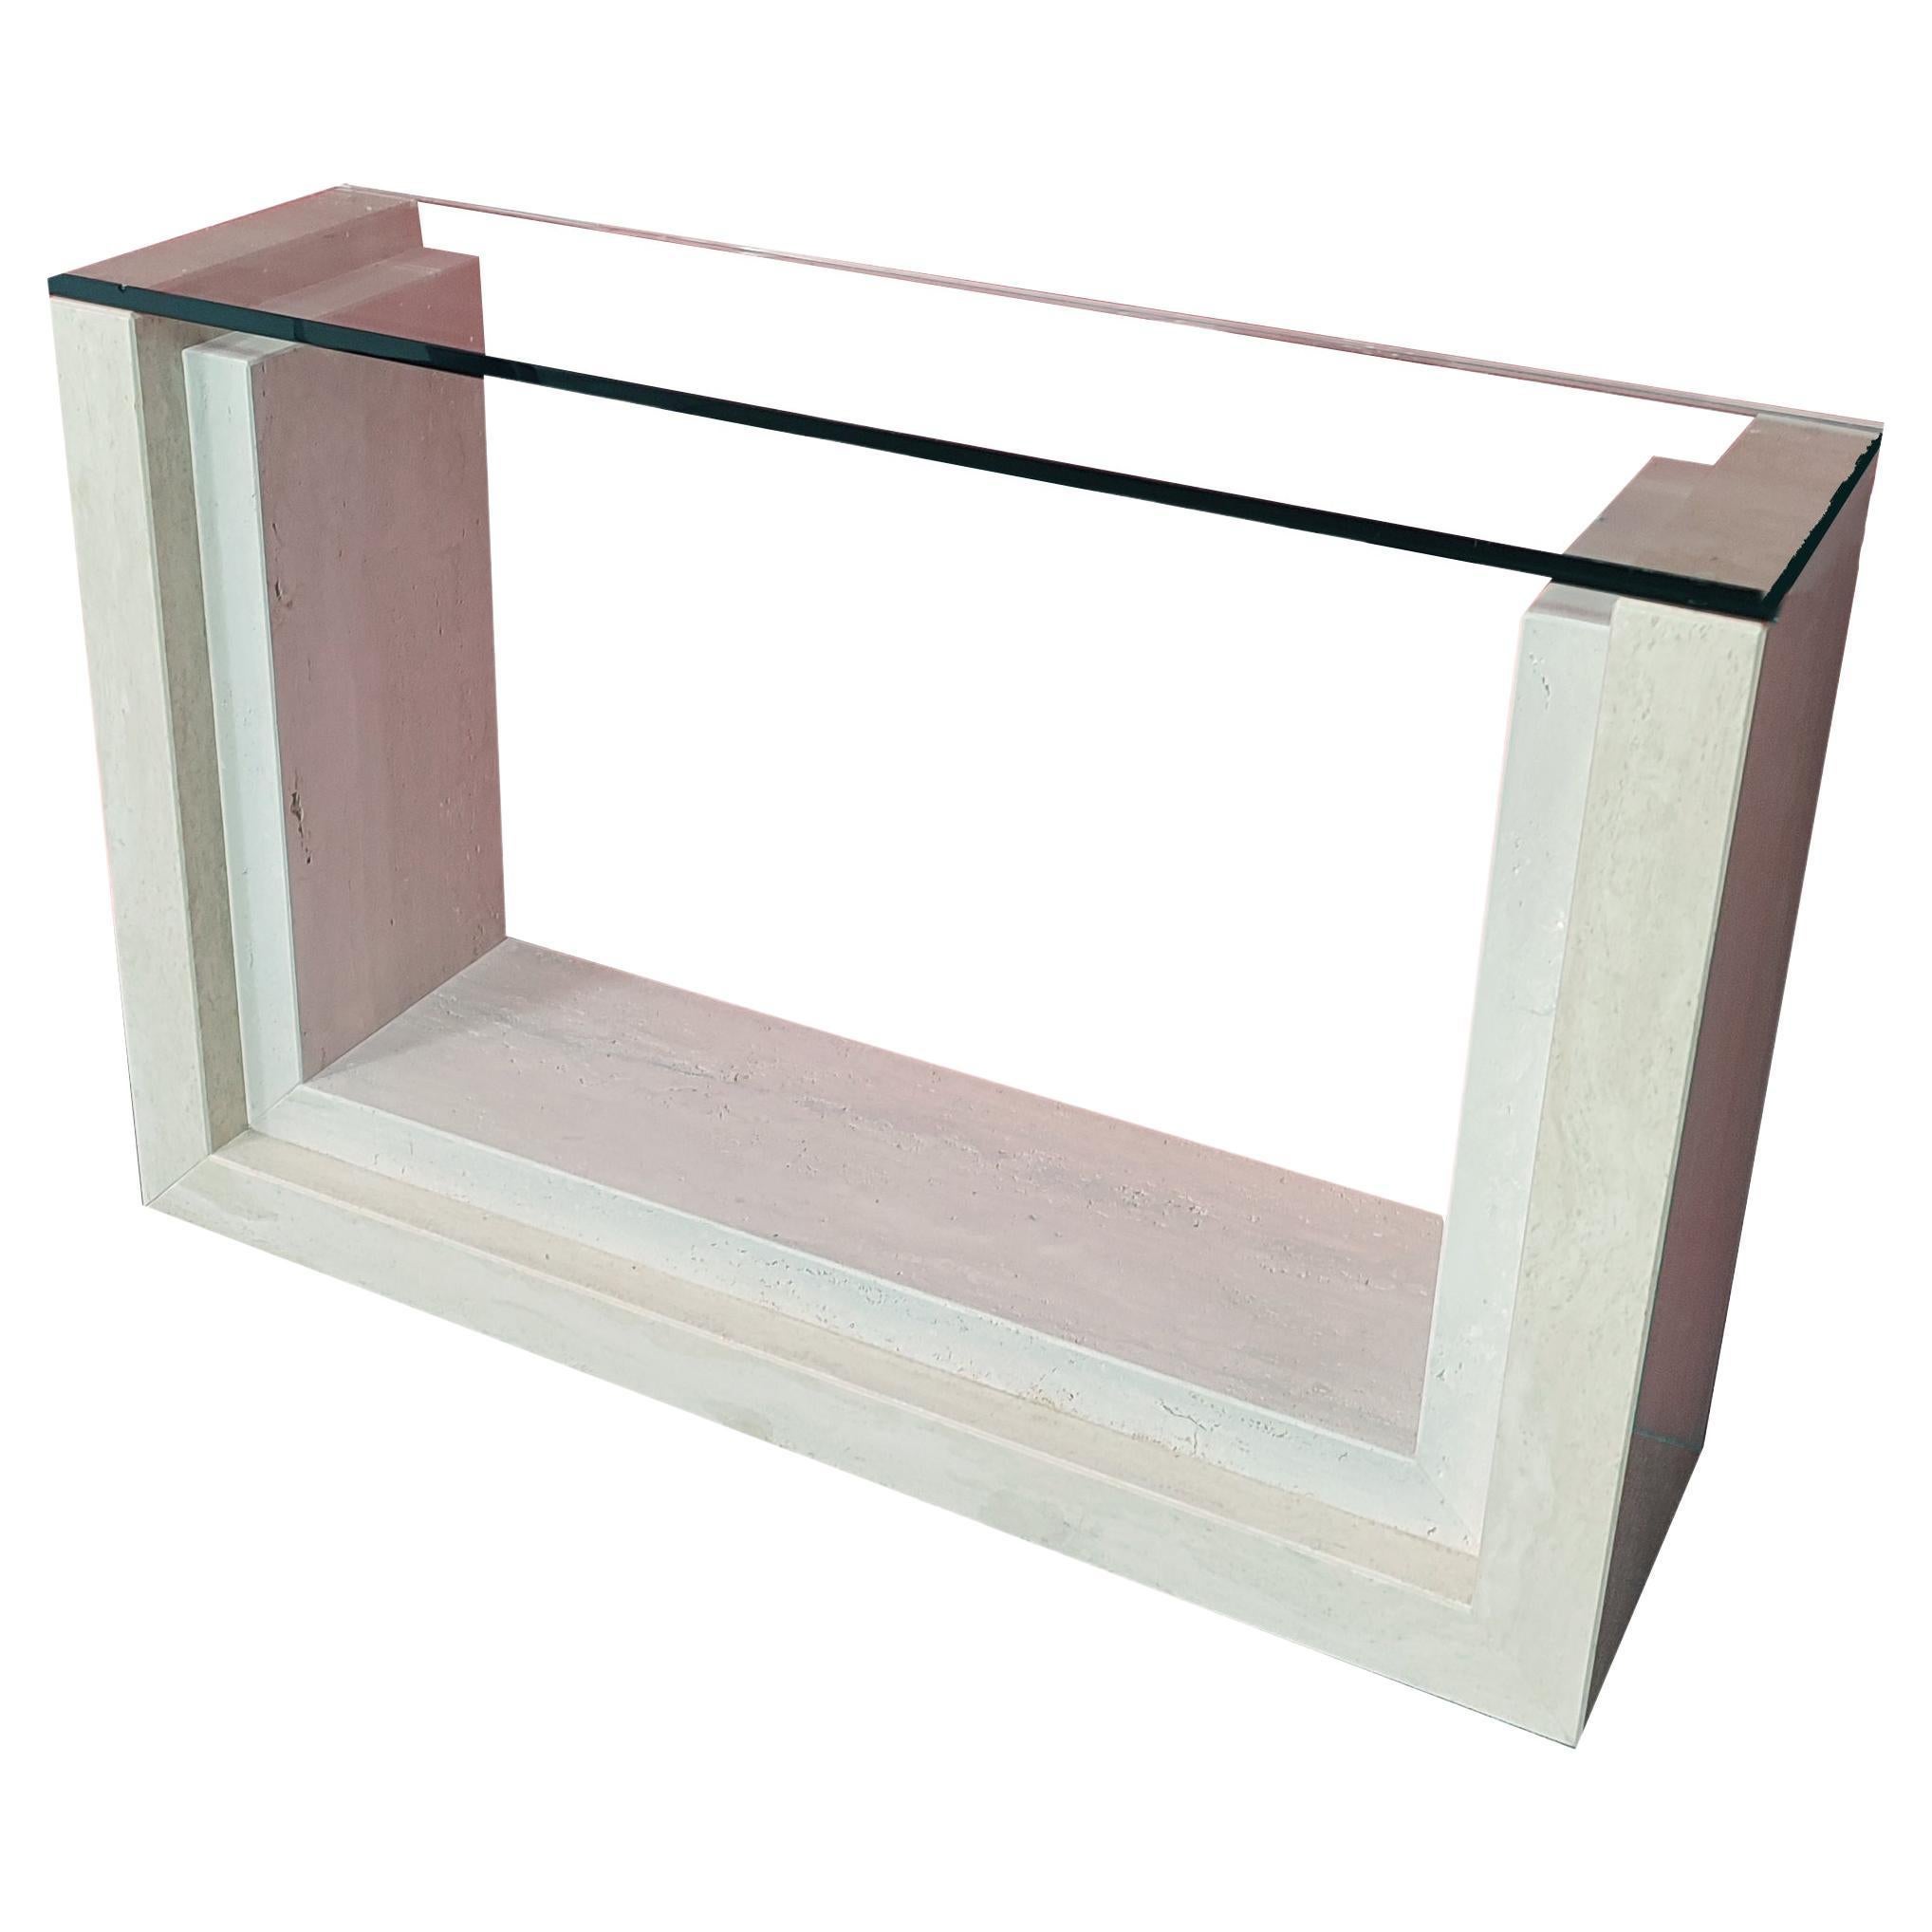 Feles Marble Travertine Console Table Natural & Matte Travertine in Stock Meddel For Sale